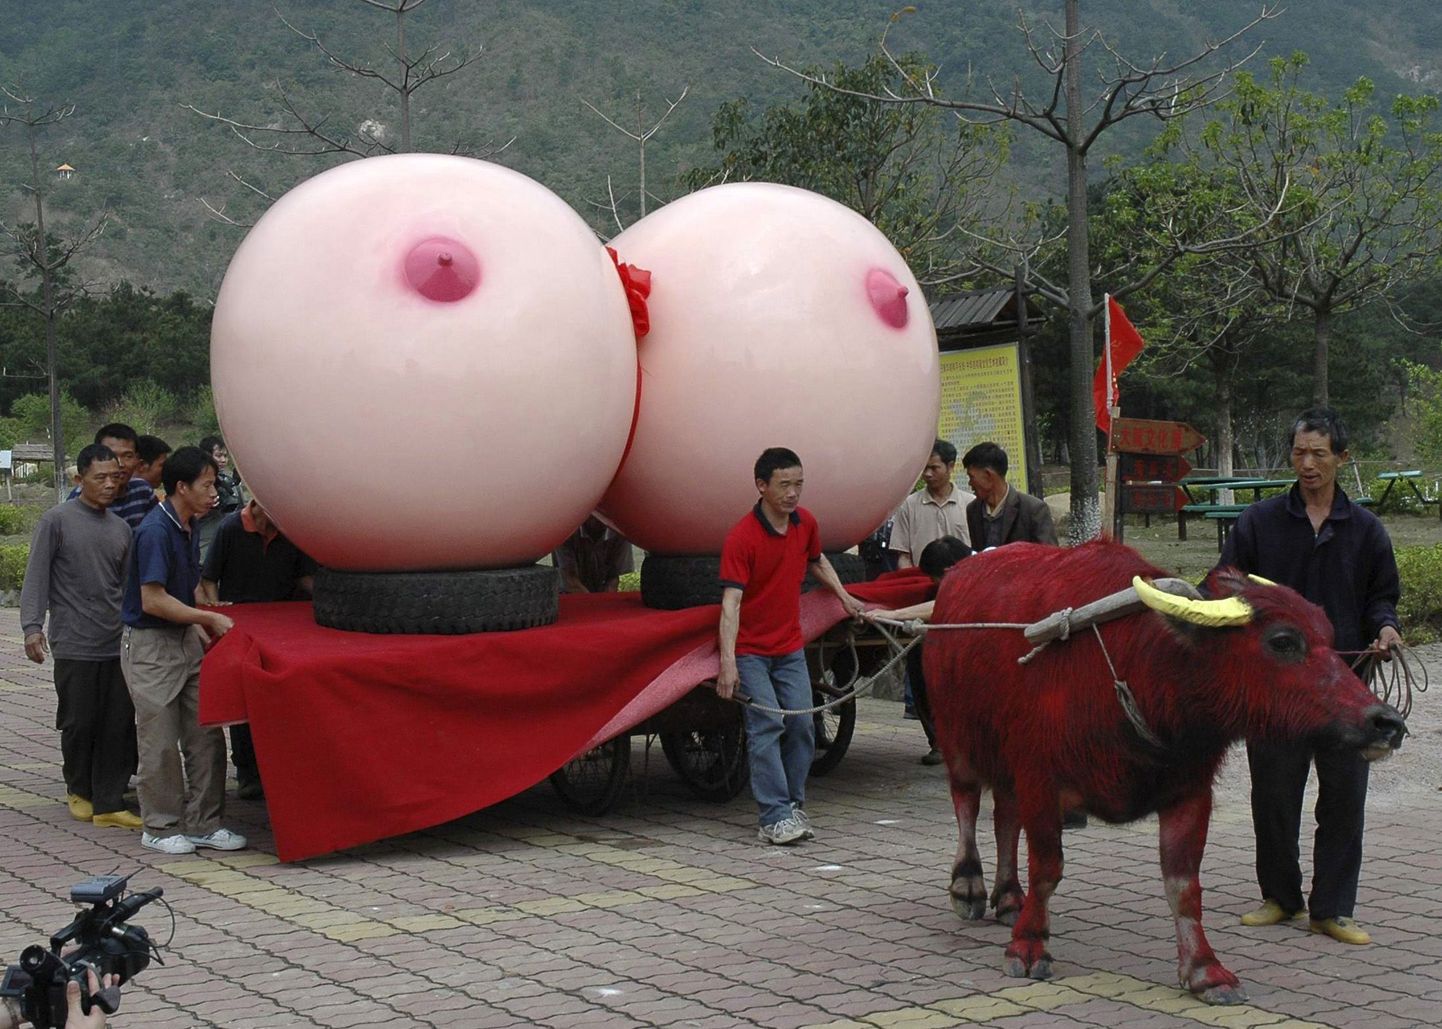 An ox tows a sculpture in the form of ball-shaped breasts made by Chinese artist Shu Yong during a local arts show in Qingyuan, Guangdong province February 24, 2009. The sculpture was previously featured in an exhibit in Beijing that aimed to increase appreciation for natural curves in a country where plastic surgery is booming. Shu's work is now being showcased to a rural audience. Picture taken February 24, 2009.   REUTERS/China Daily  (CHINA).  CHINA OUT. NO COMMERCIAL OR EDITORIAL SALES IN CHINA.